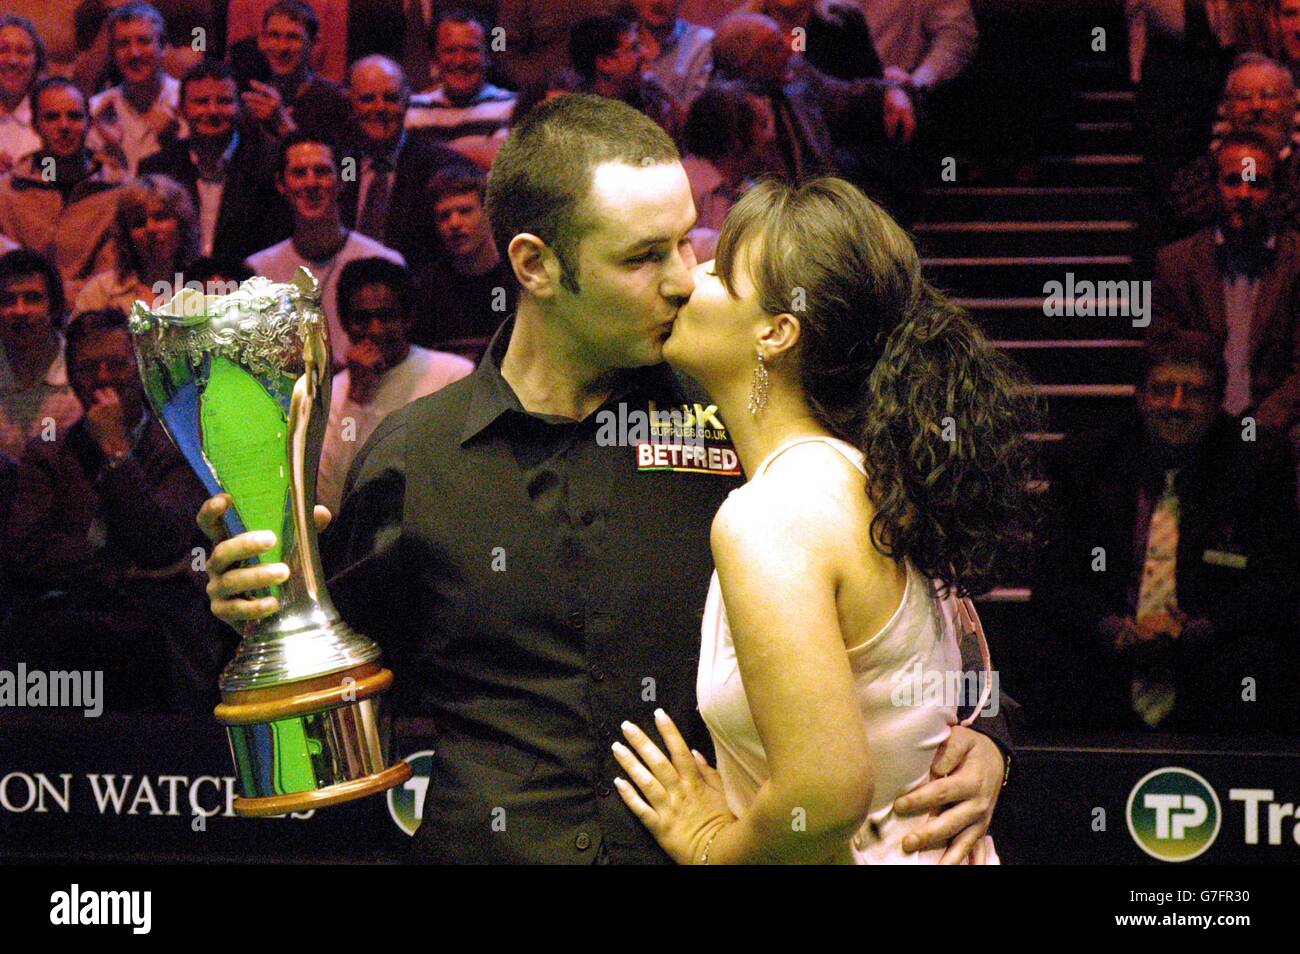 Stephen Maguire Wins 2004 UK Snooker Championship. Stephen Maguire celebrates with girlfriend Sharon after winning the 2004 UK Snooker Championship, at the Barbican in York. Stock Photo